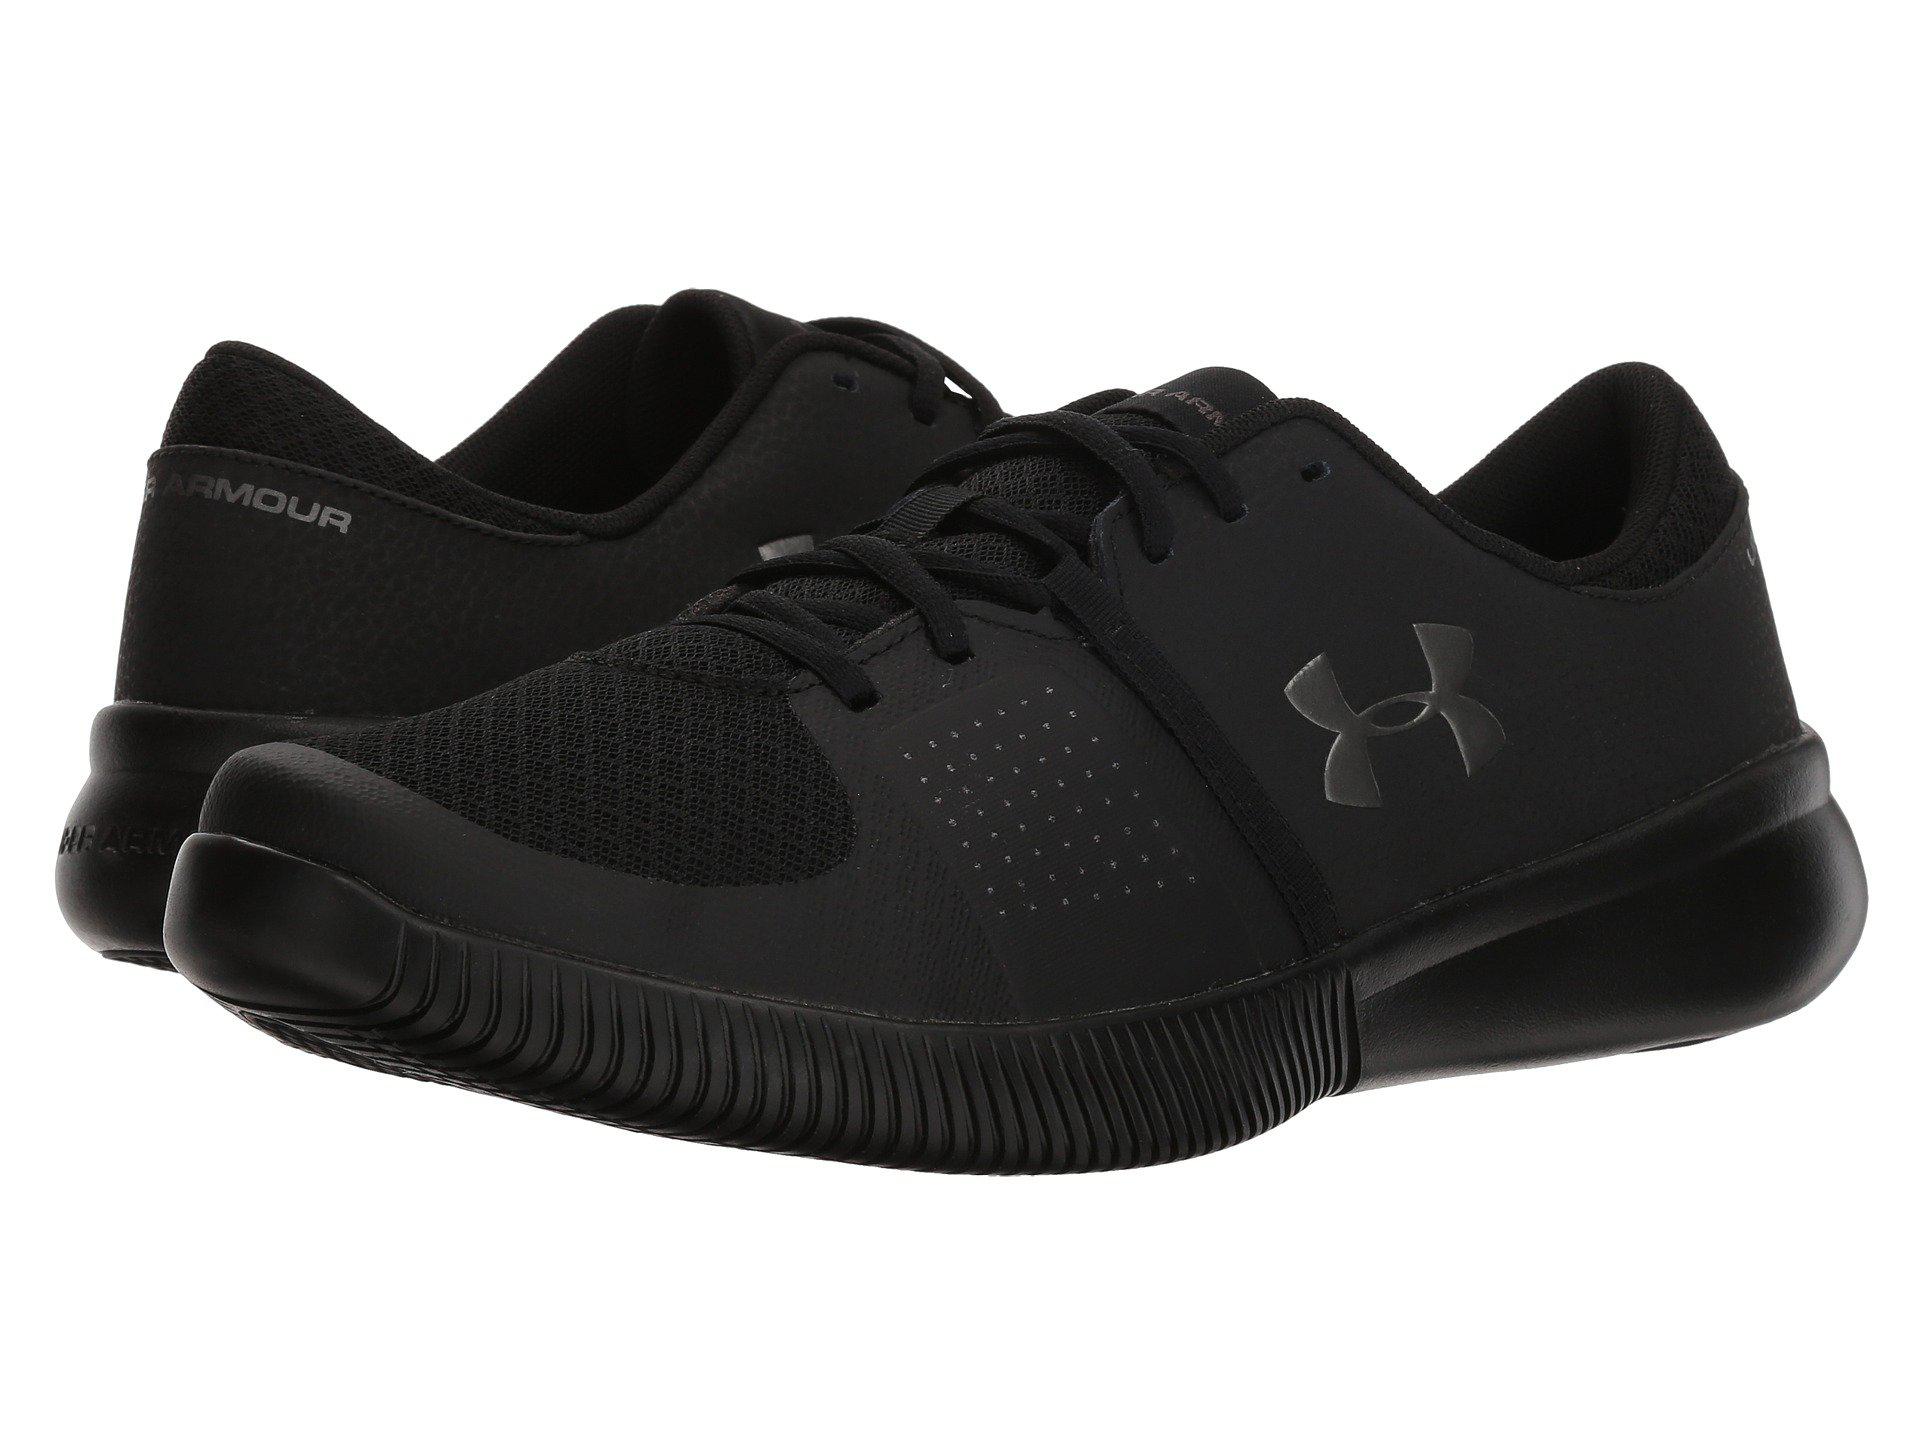 under armour zone 3 shoes